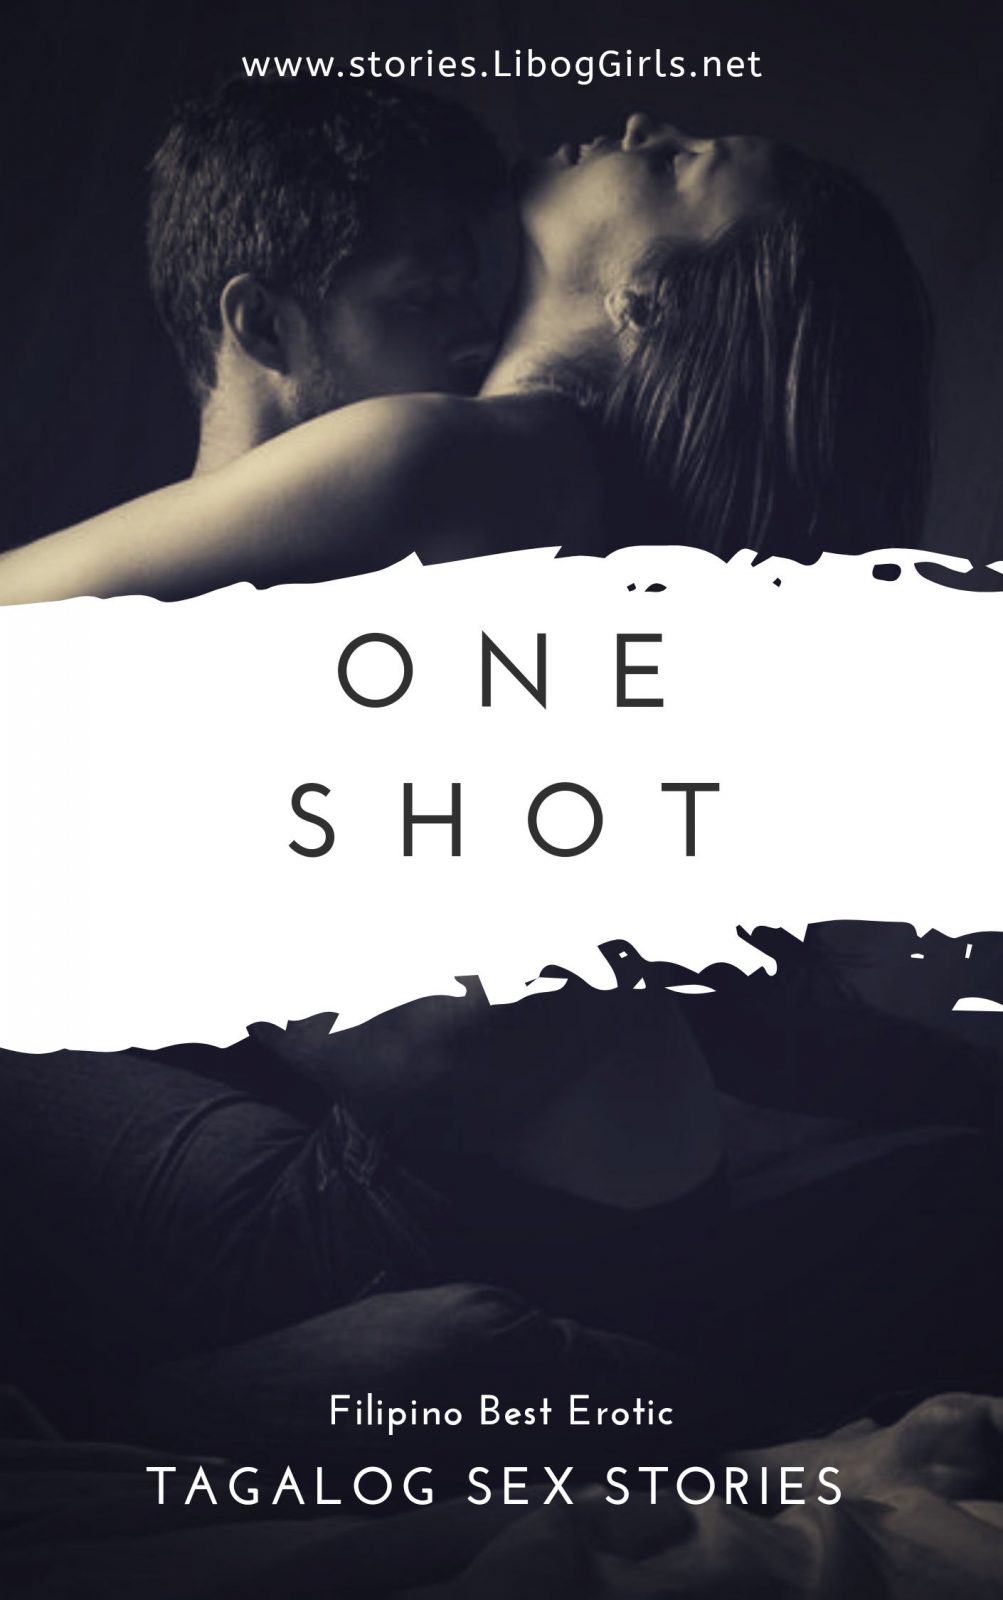 One Shot - Tagalog Sex Stories and Pinoy Sex Stories